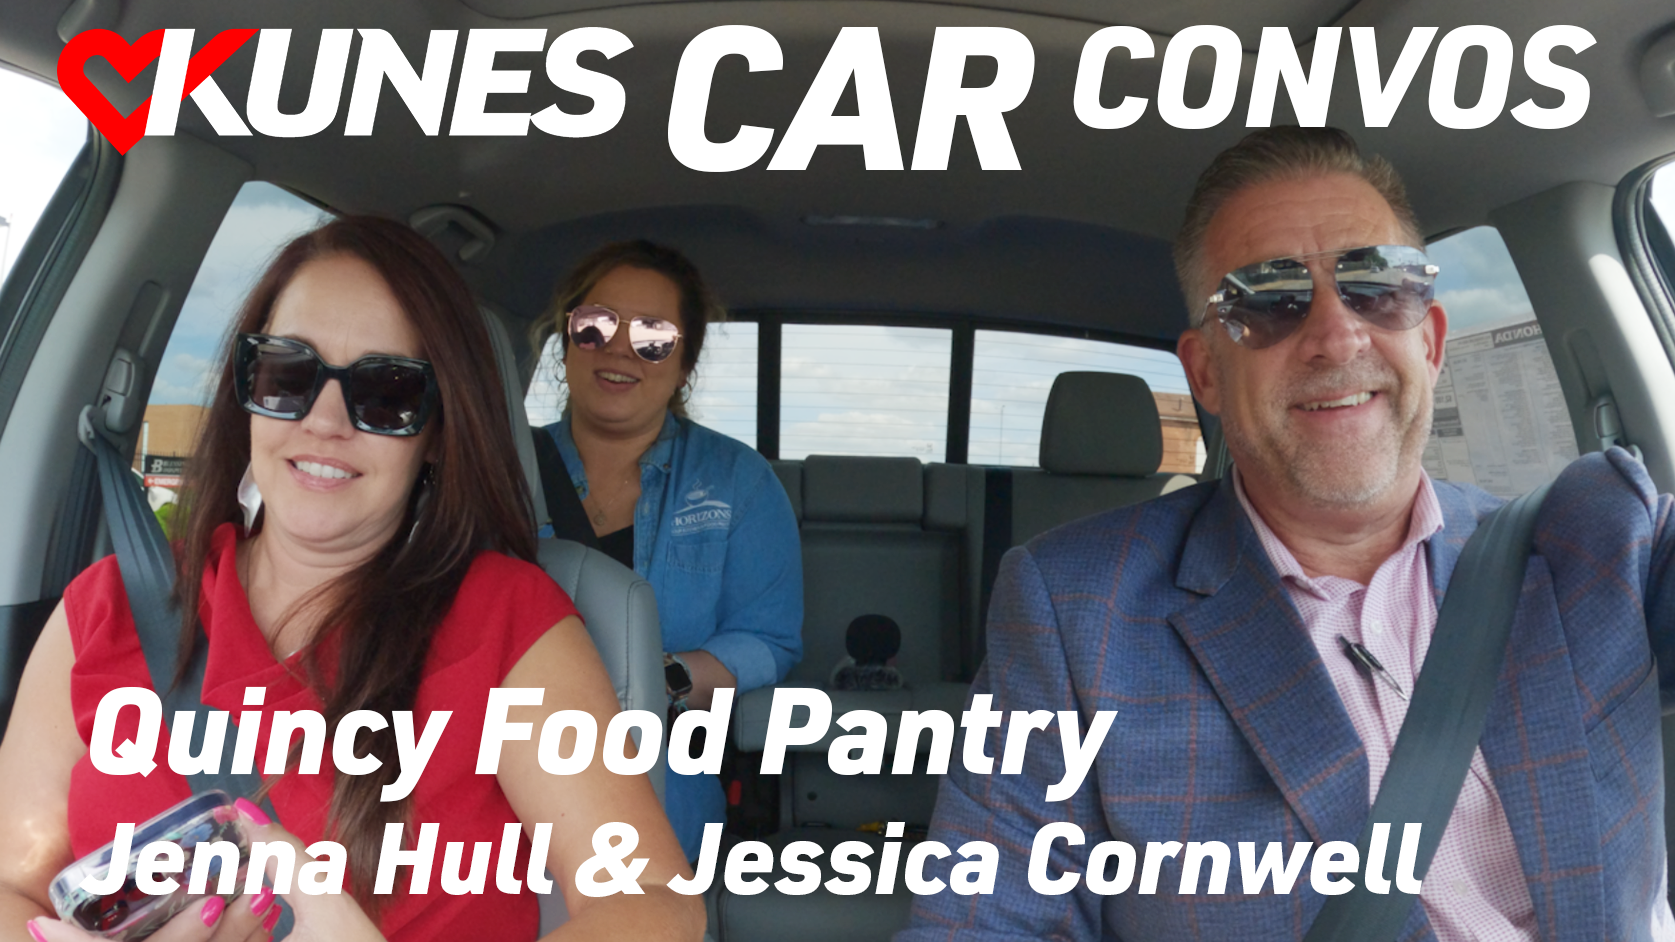 Pictured: Jenna Hull, Director of Development & Communications, Jessica Cornwell, Manager of Horizons Soup Kitchen and Food Pantry, and Jeff Conn, General Manager of Kunes Honda of Quincy, riding together inside of a 2023 Honda Ridgeline RTL. Text reads: Kunes Car Convos; Quincy Food Pantry; Jenna Jull & Jessica Cornwell